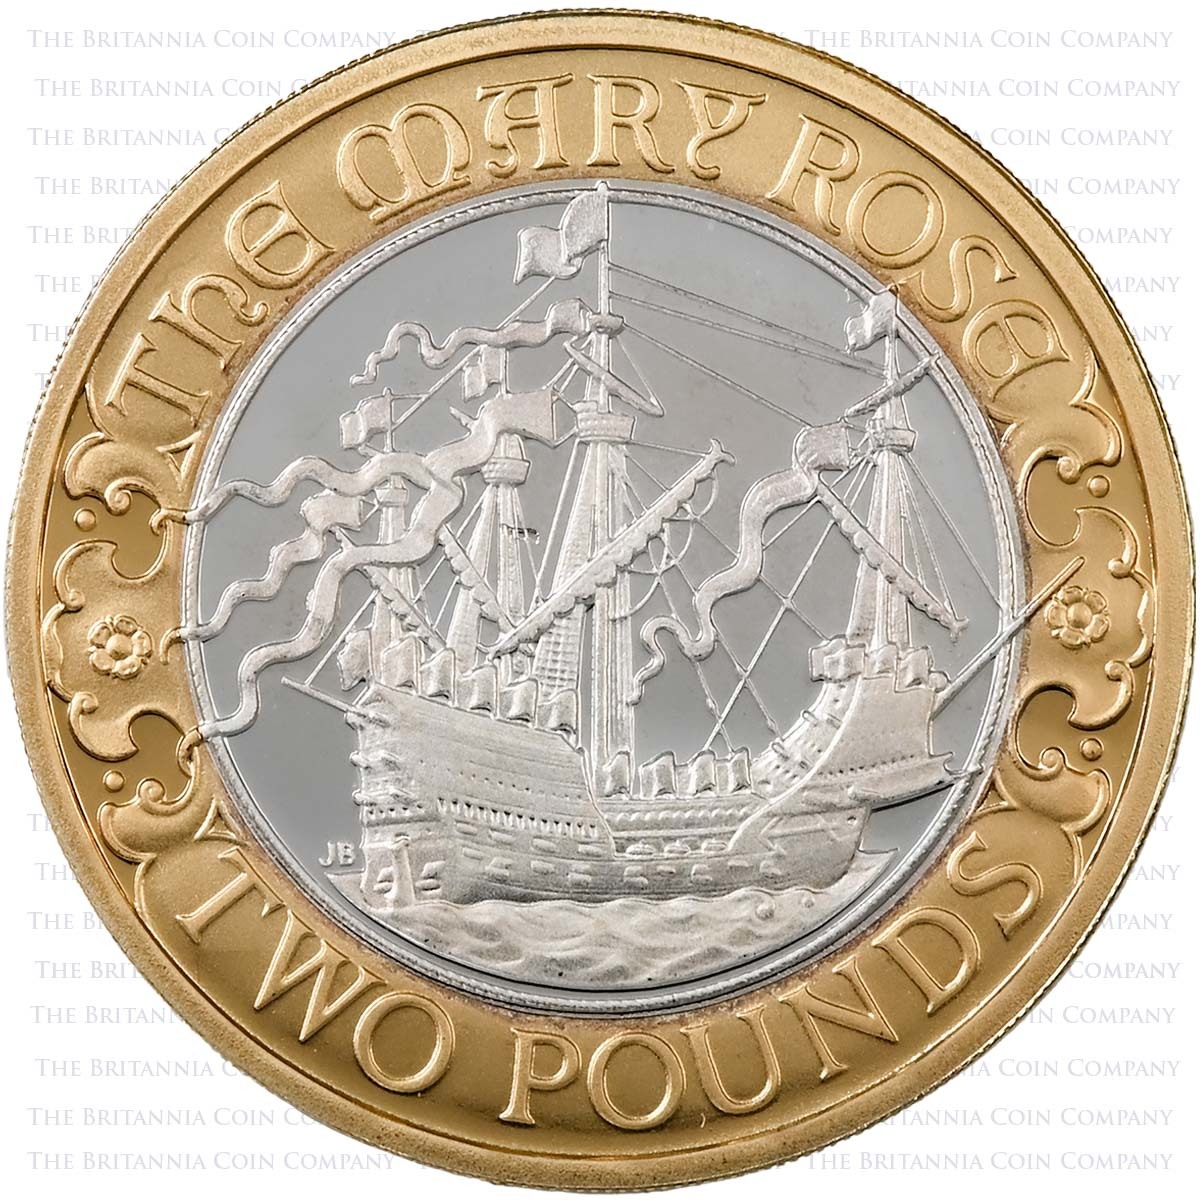 UKMRPF 2011 Mary Rose Two Pound Piedfort Silver Proof Coin Reverse